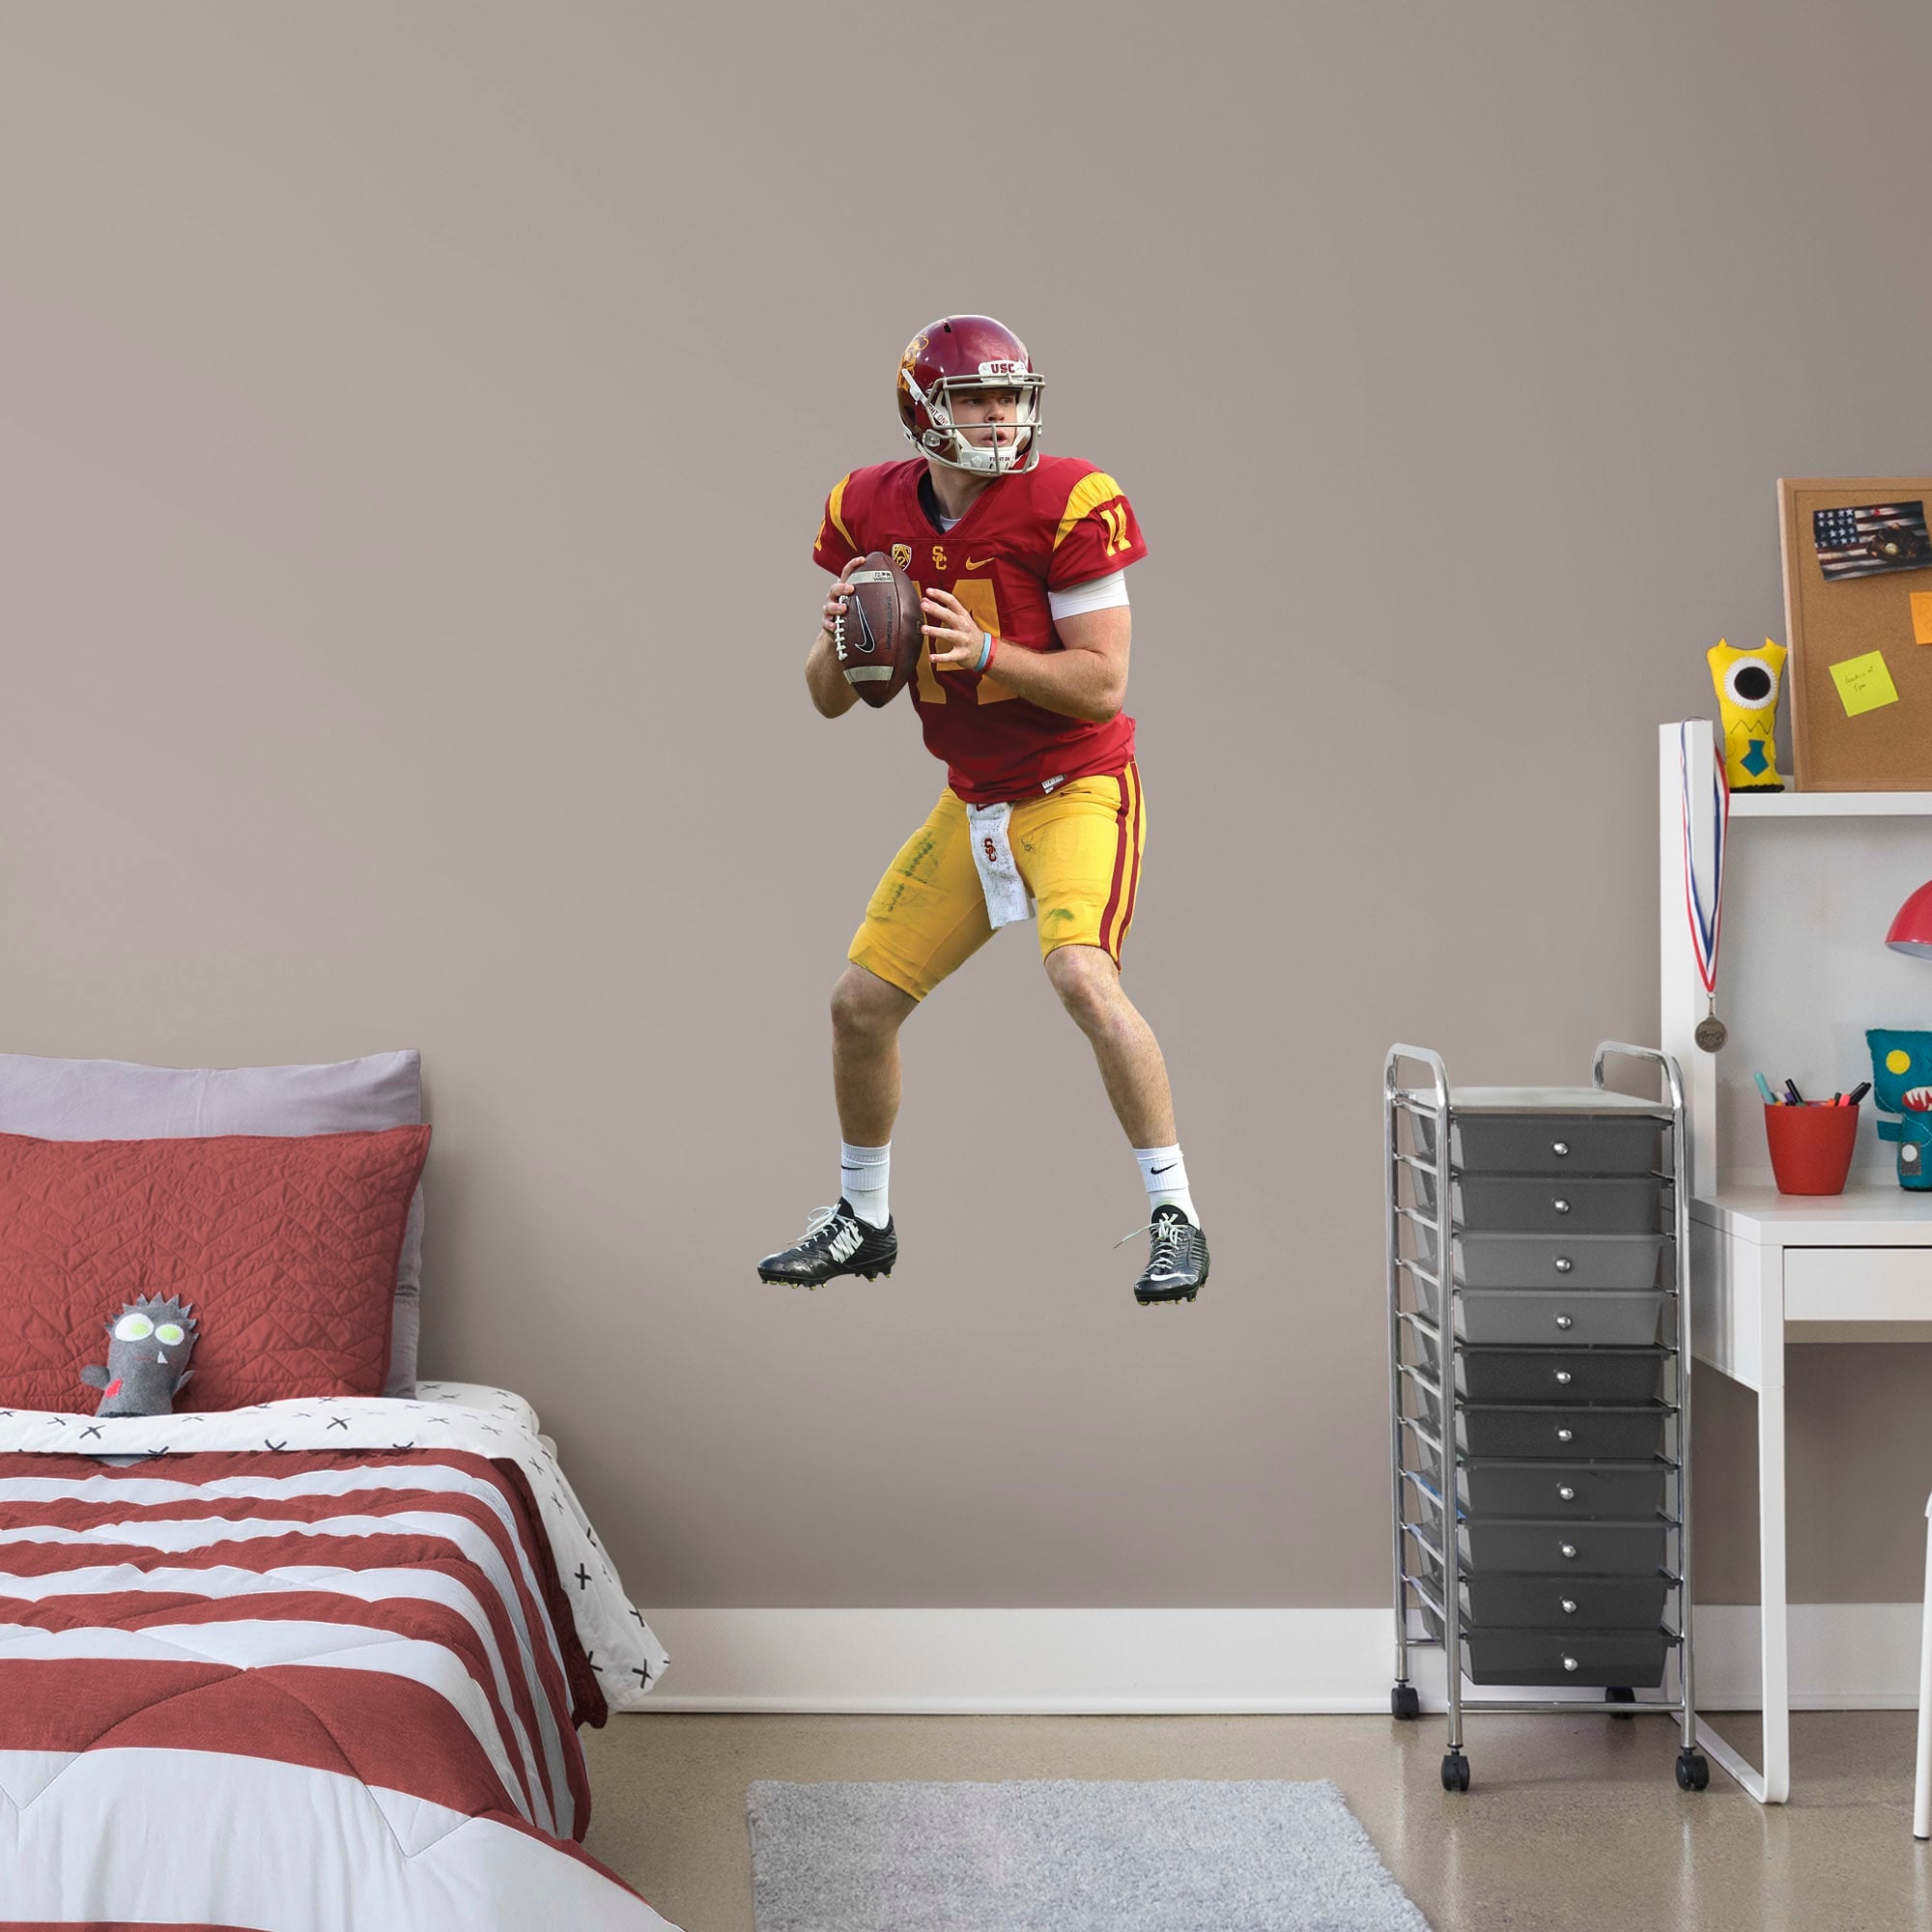 Sam Darnold for USC Trojans: USC - Officially Licensed Removable Wall Decal Giant Athlete + 2 Decals (24"W x 51"H) by Fathead |